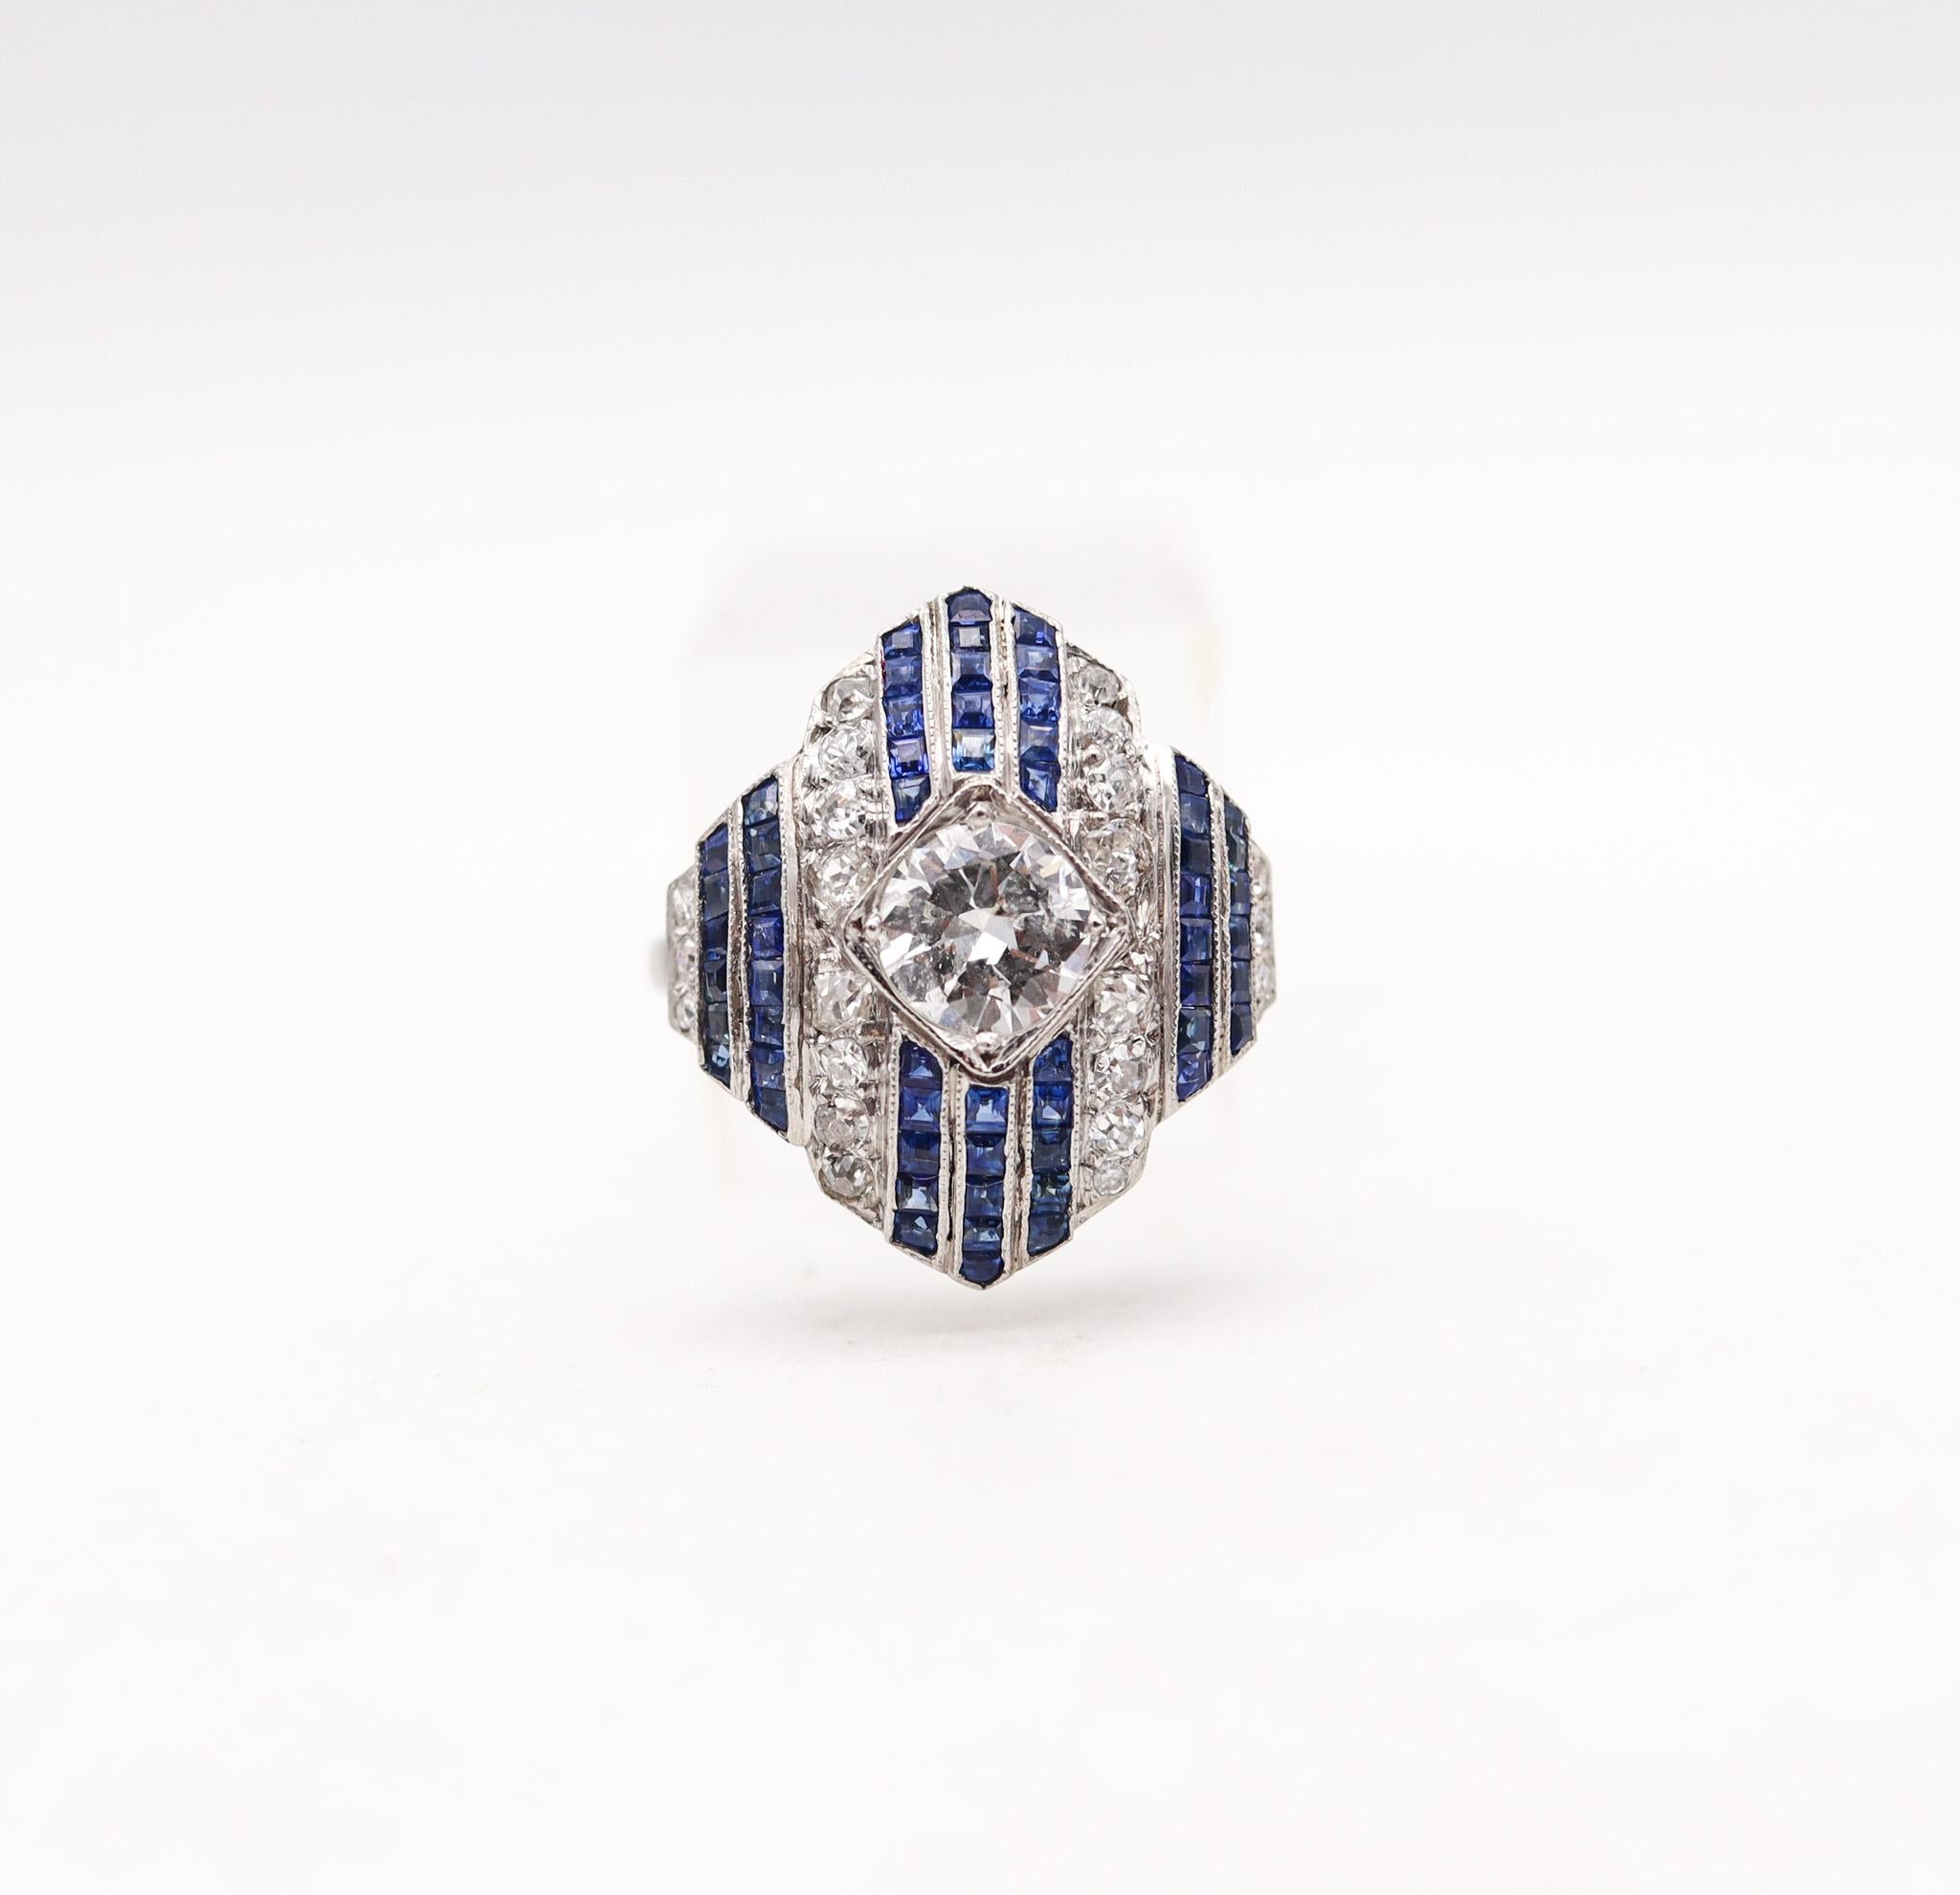 An art deco platinum ring with sapphires

Beautiful antique cocktail ring, created in America during the art deco period, back in the 1930. This beautiful ring was crafted in solid platinum and mount with a great selection of natural gemstones. The